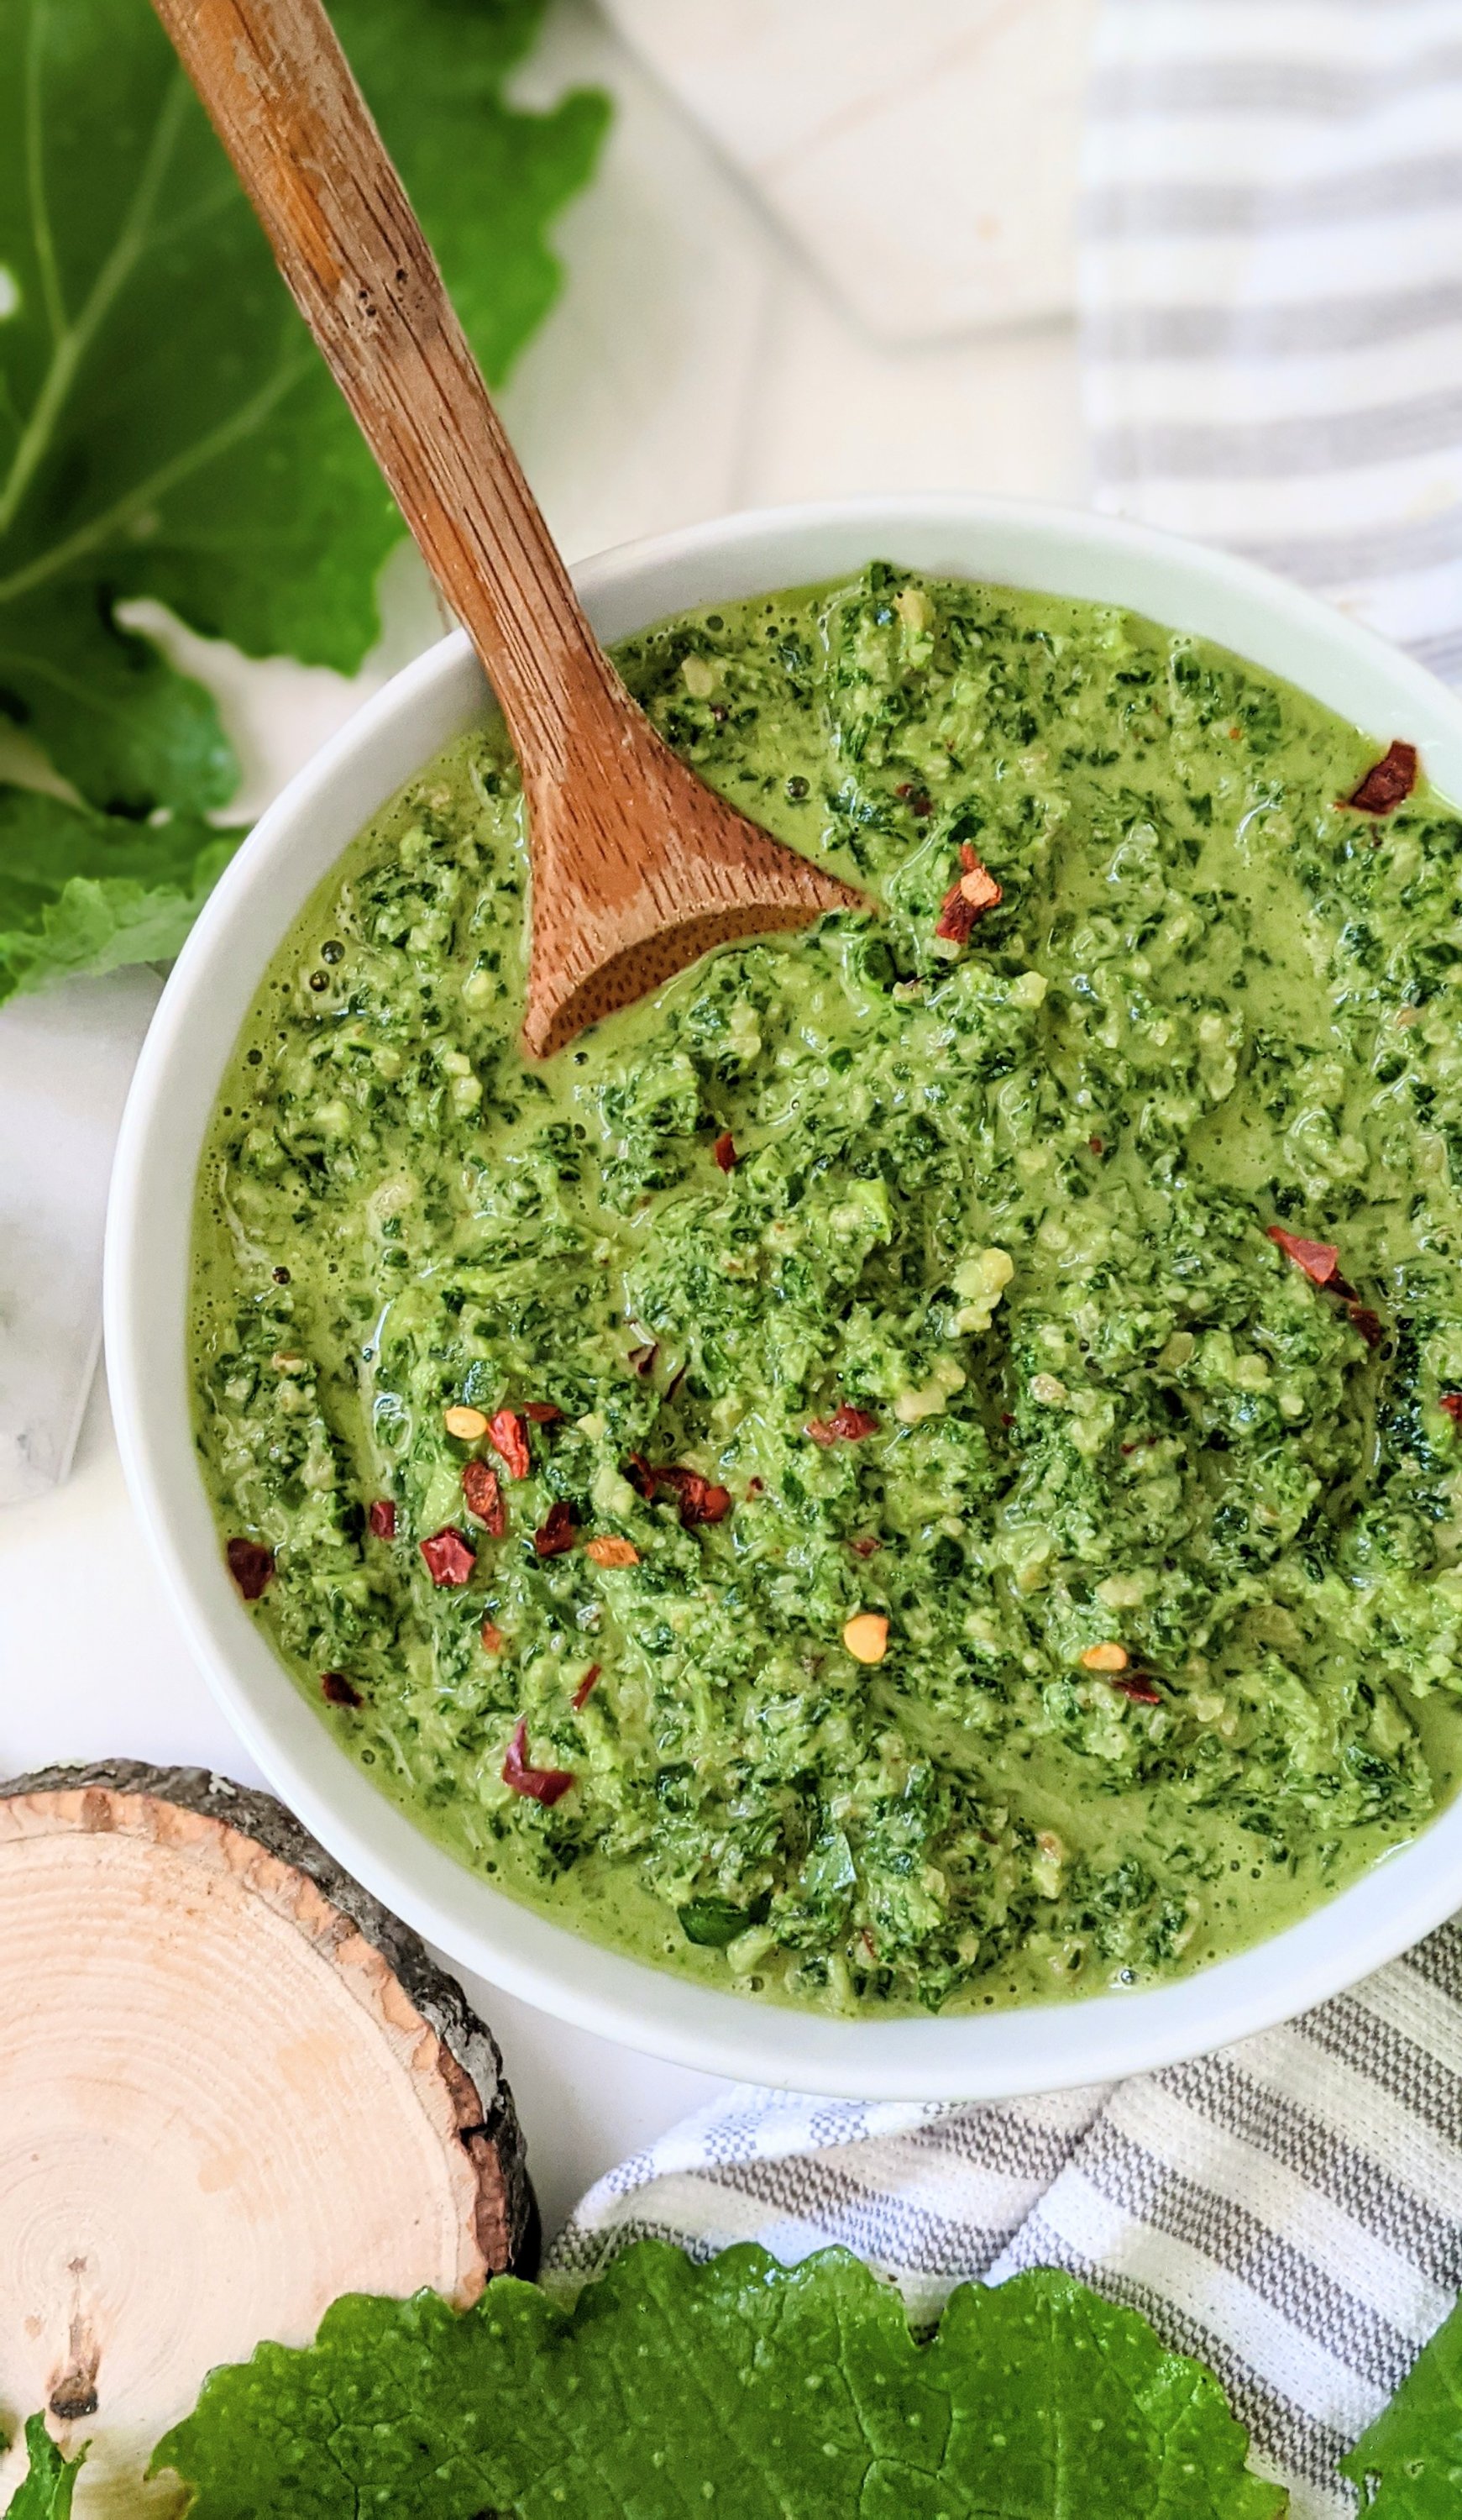 keto vegan sauces recipes with turnip leaves pesto dairy free turnip green recipes healthy plant based greens recipes from turnips